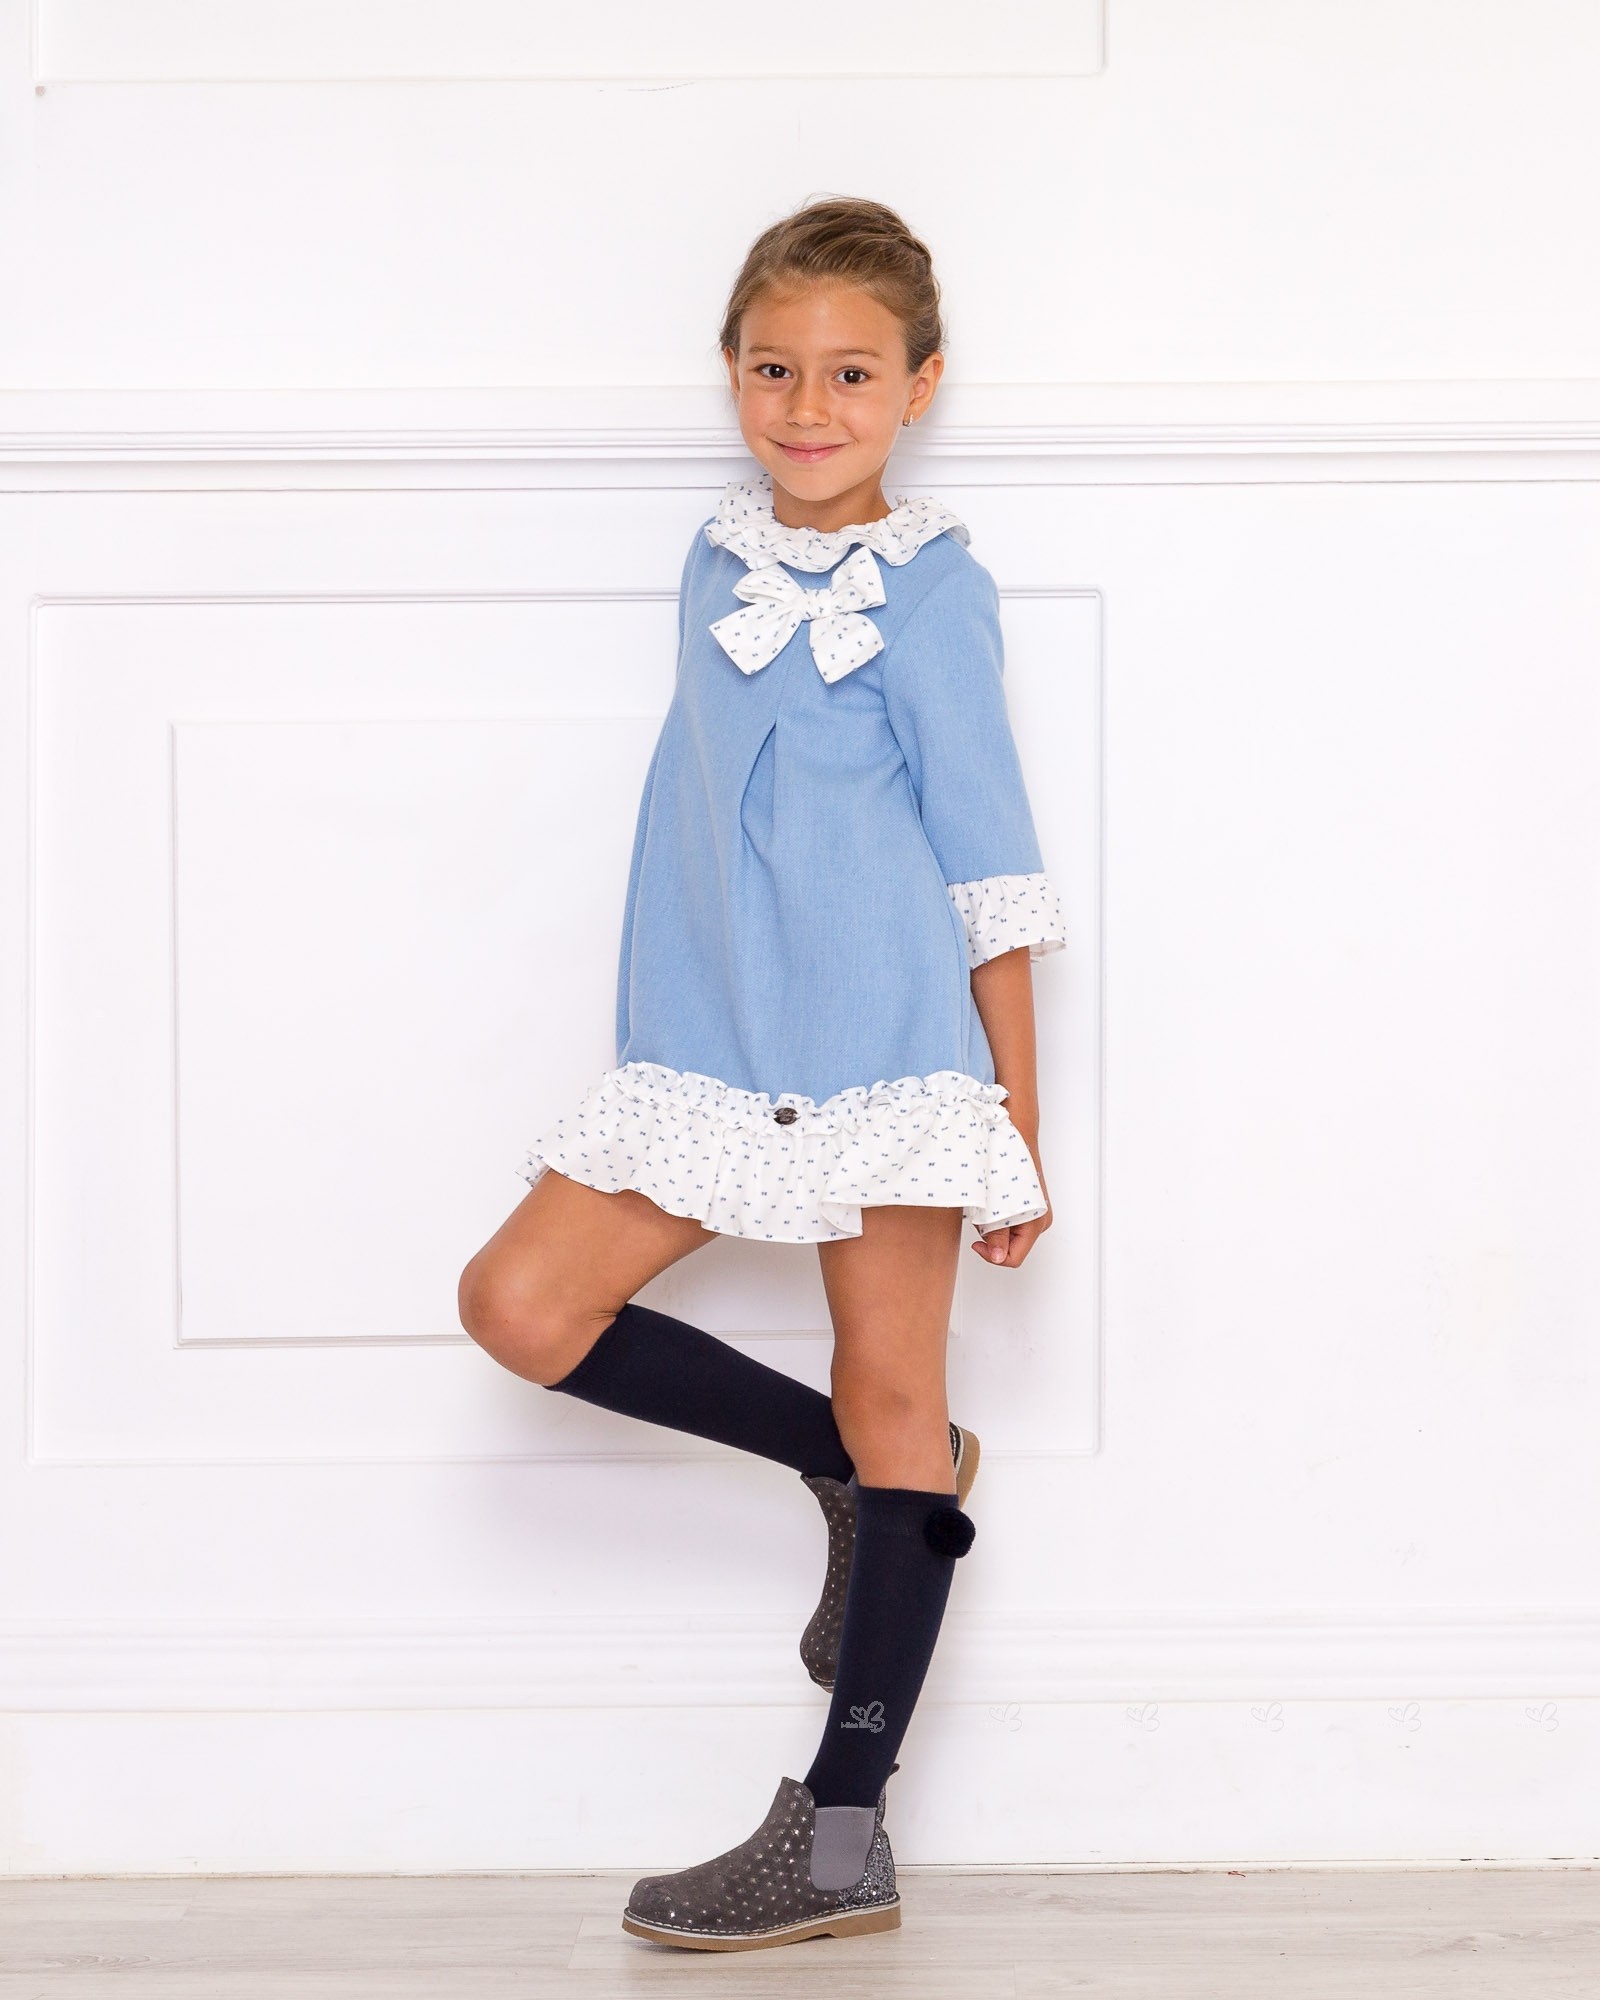 Girls Gray Suede \u0026 Glitter Boots Outfit 